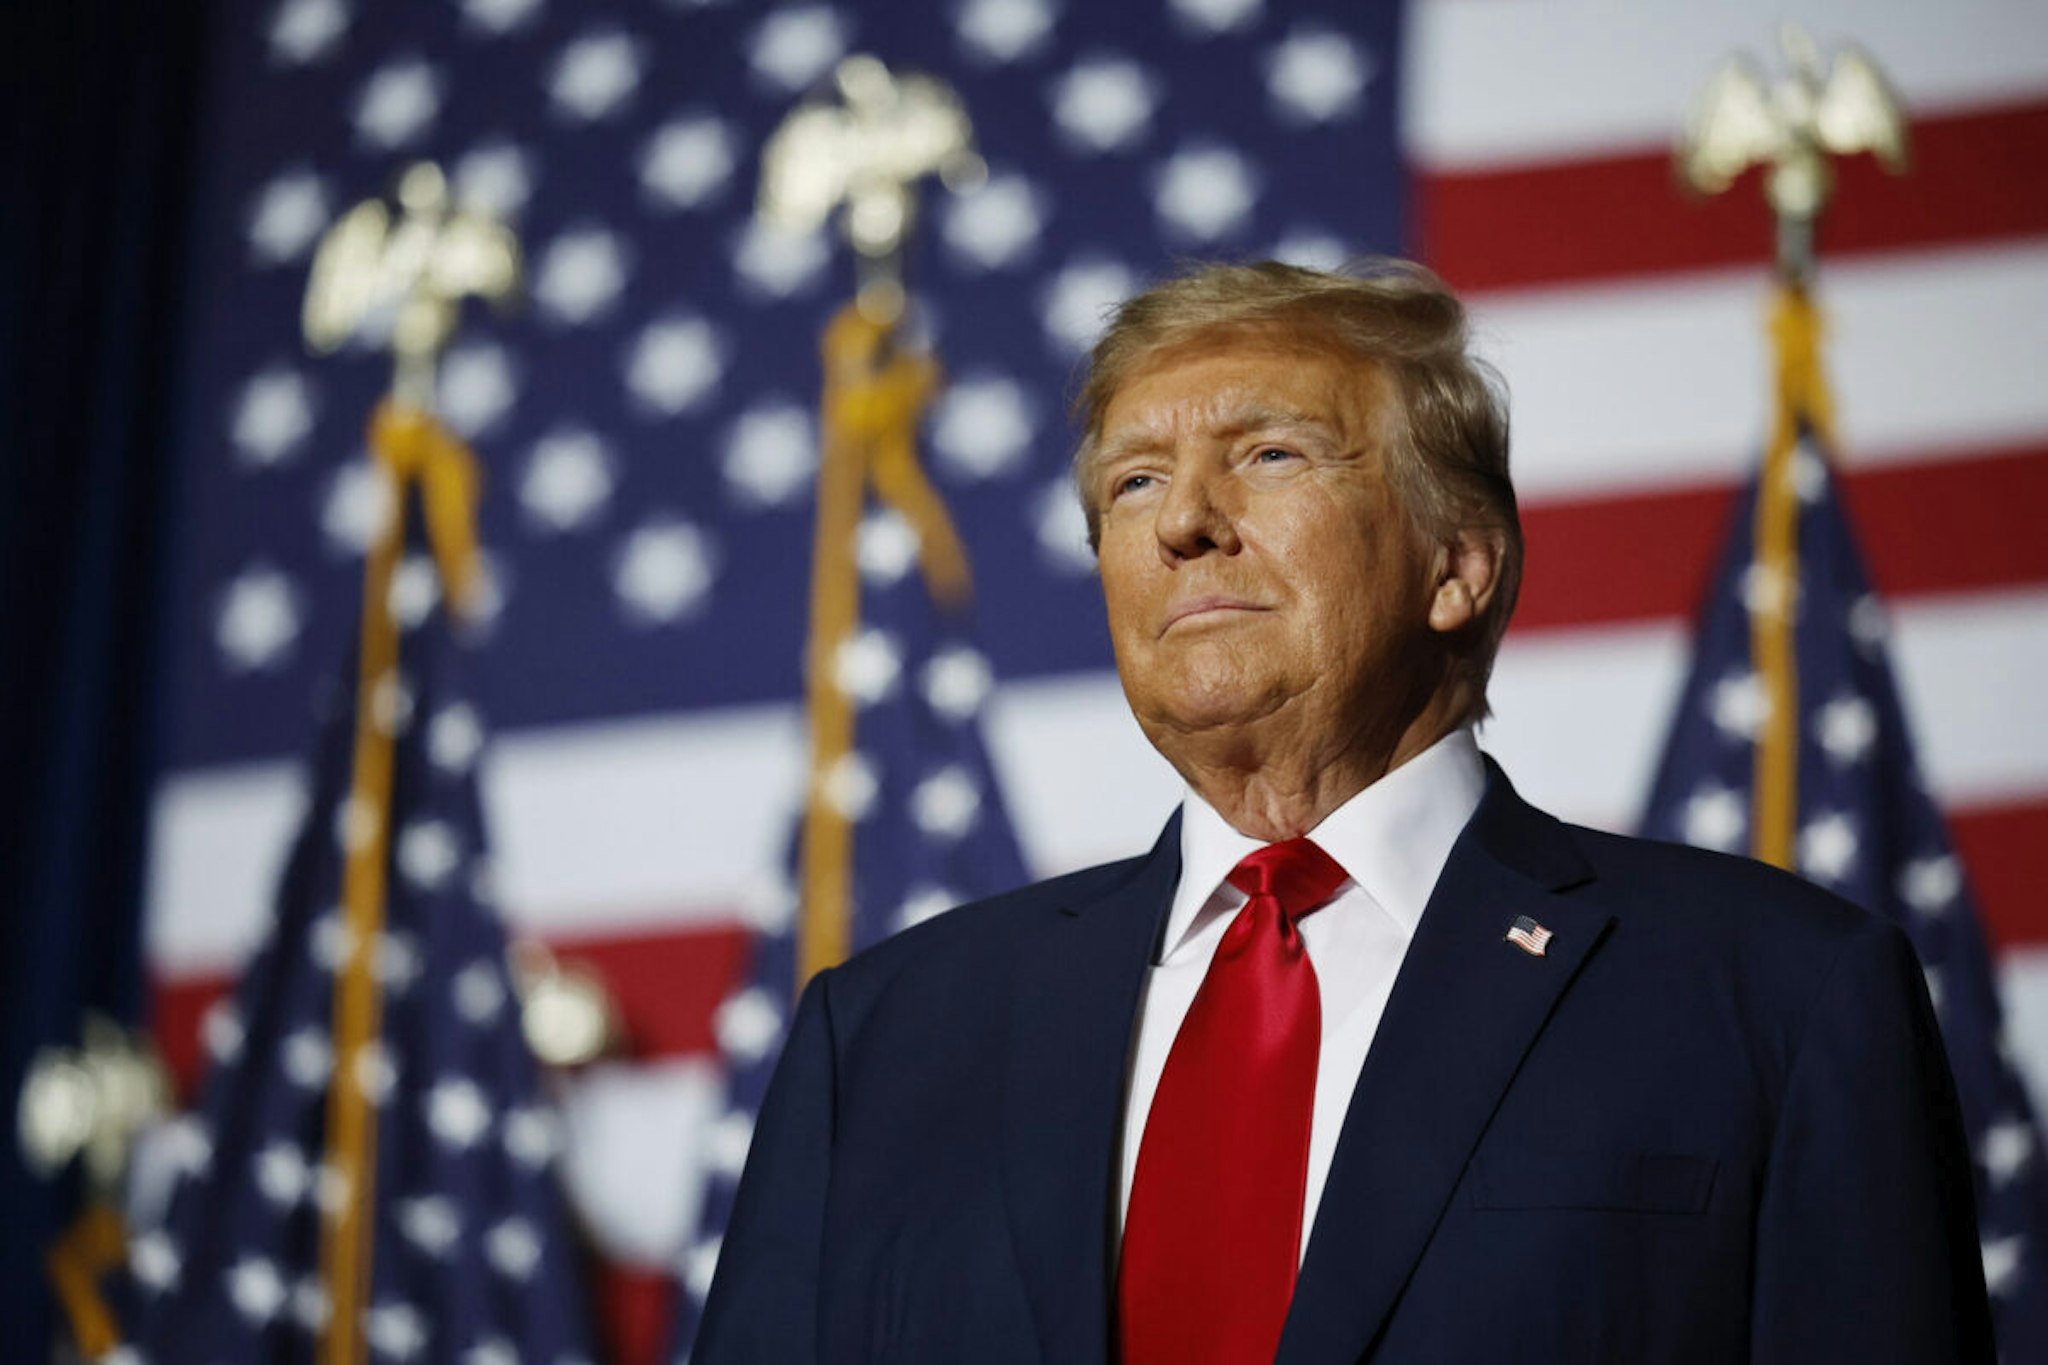 DES MOINES, IOWA - JANUARY 15: Former President Donald Trump speaks at his caucus night event at the Iowa Events Center on January 15, 2024 in Des Moines, Iowa. Iowans voted today in the state’s caucuses for the first contest in the 2024 Republican presidential nominating process. Trump has been projected winner of the Iowa caucus.